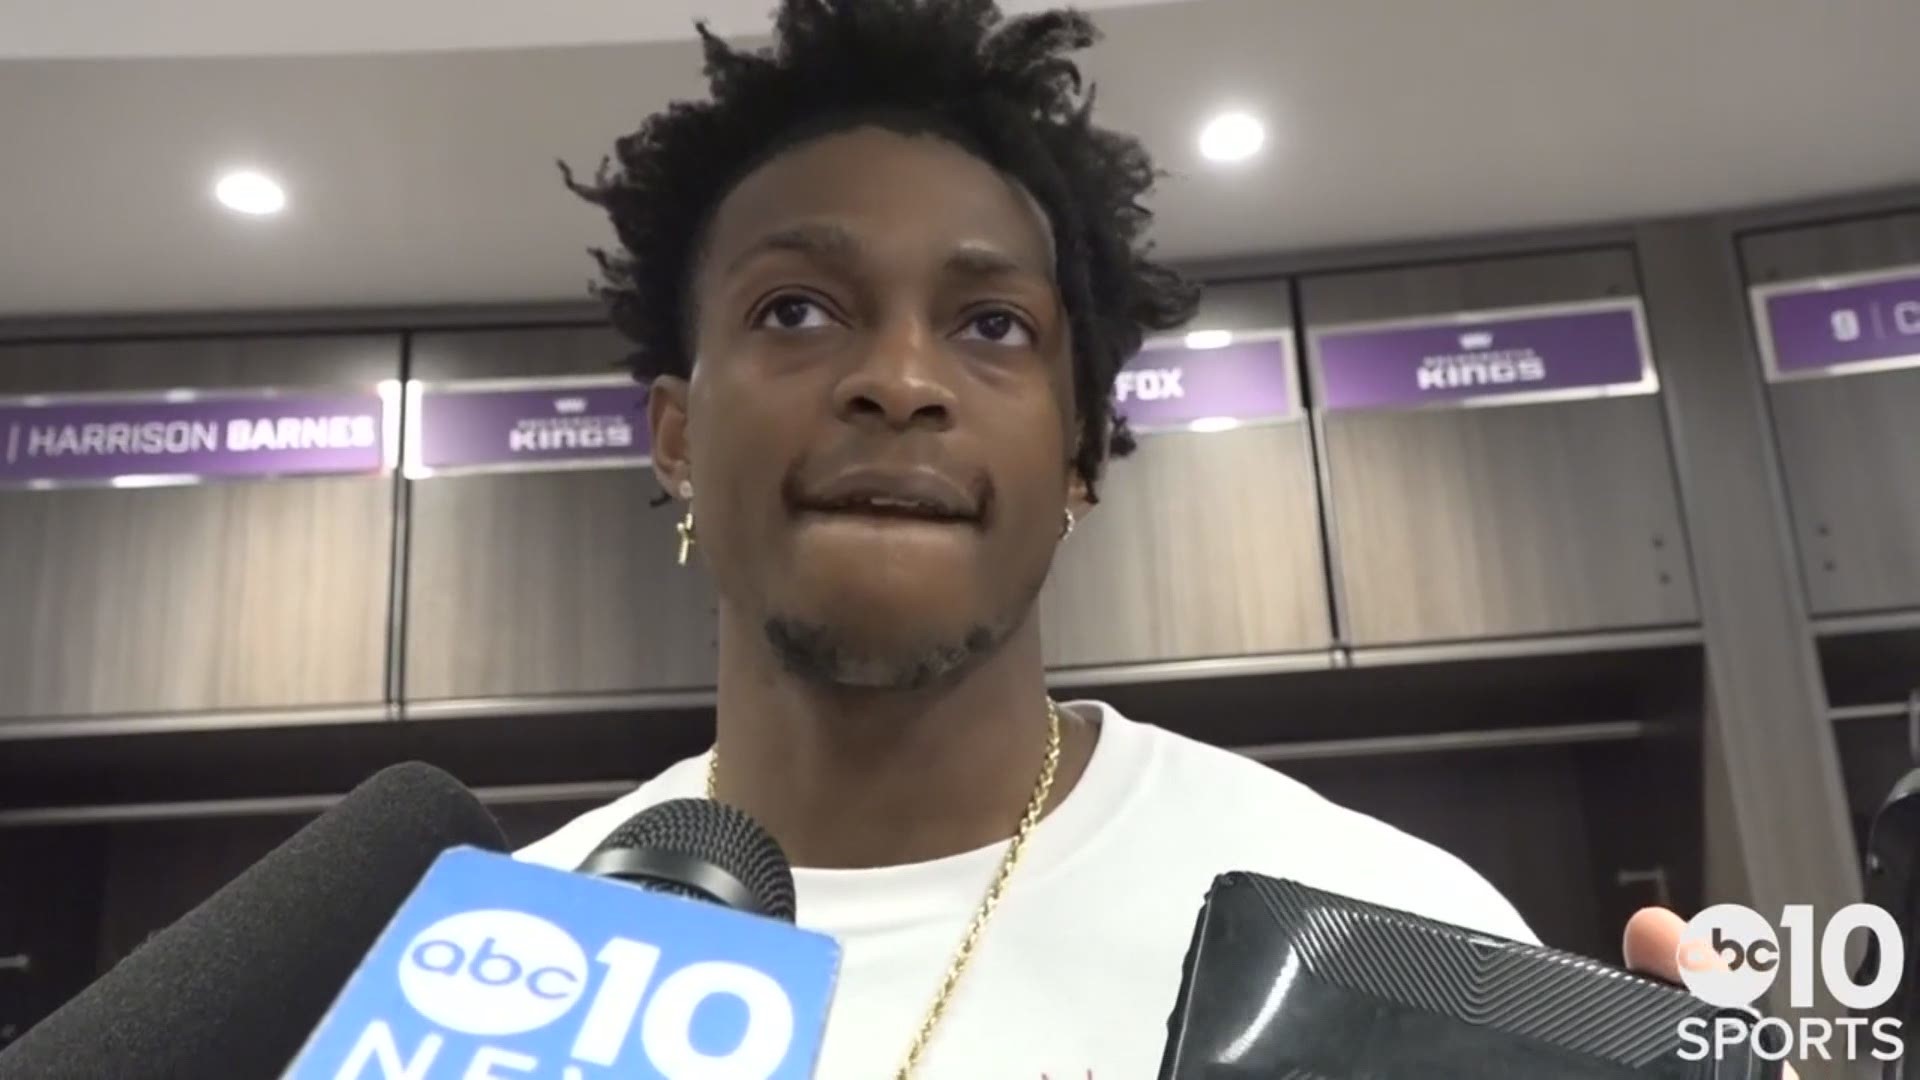 Kings PG De'Aaron Fox is unhappy with his performance on Saturday night, where Sacramento committed 21 turnovers and lost to the New Orleans Pelicans 117-115.